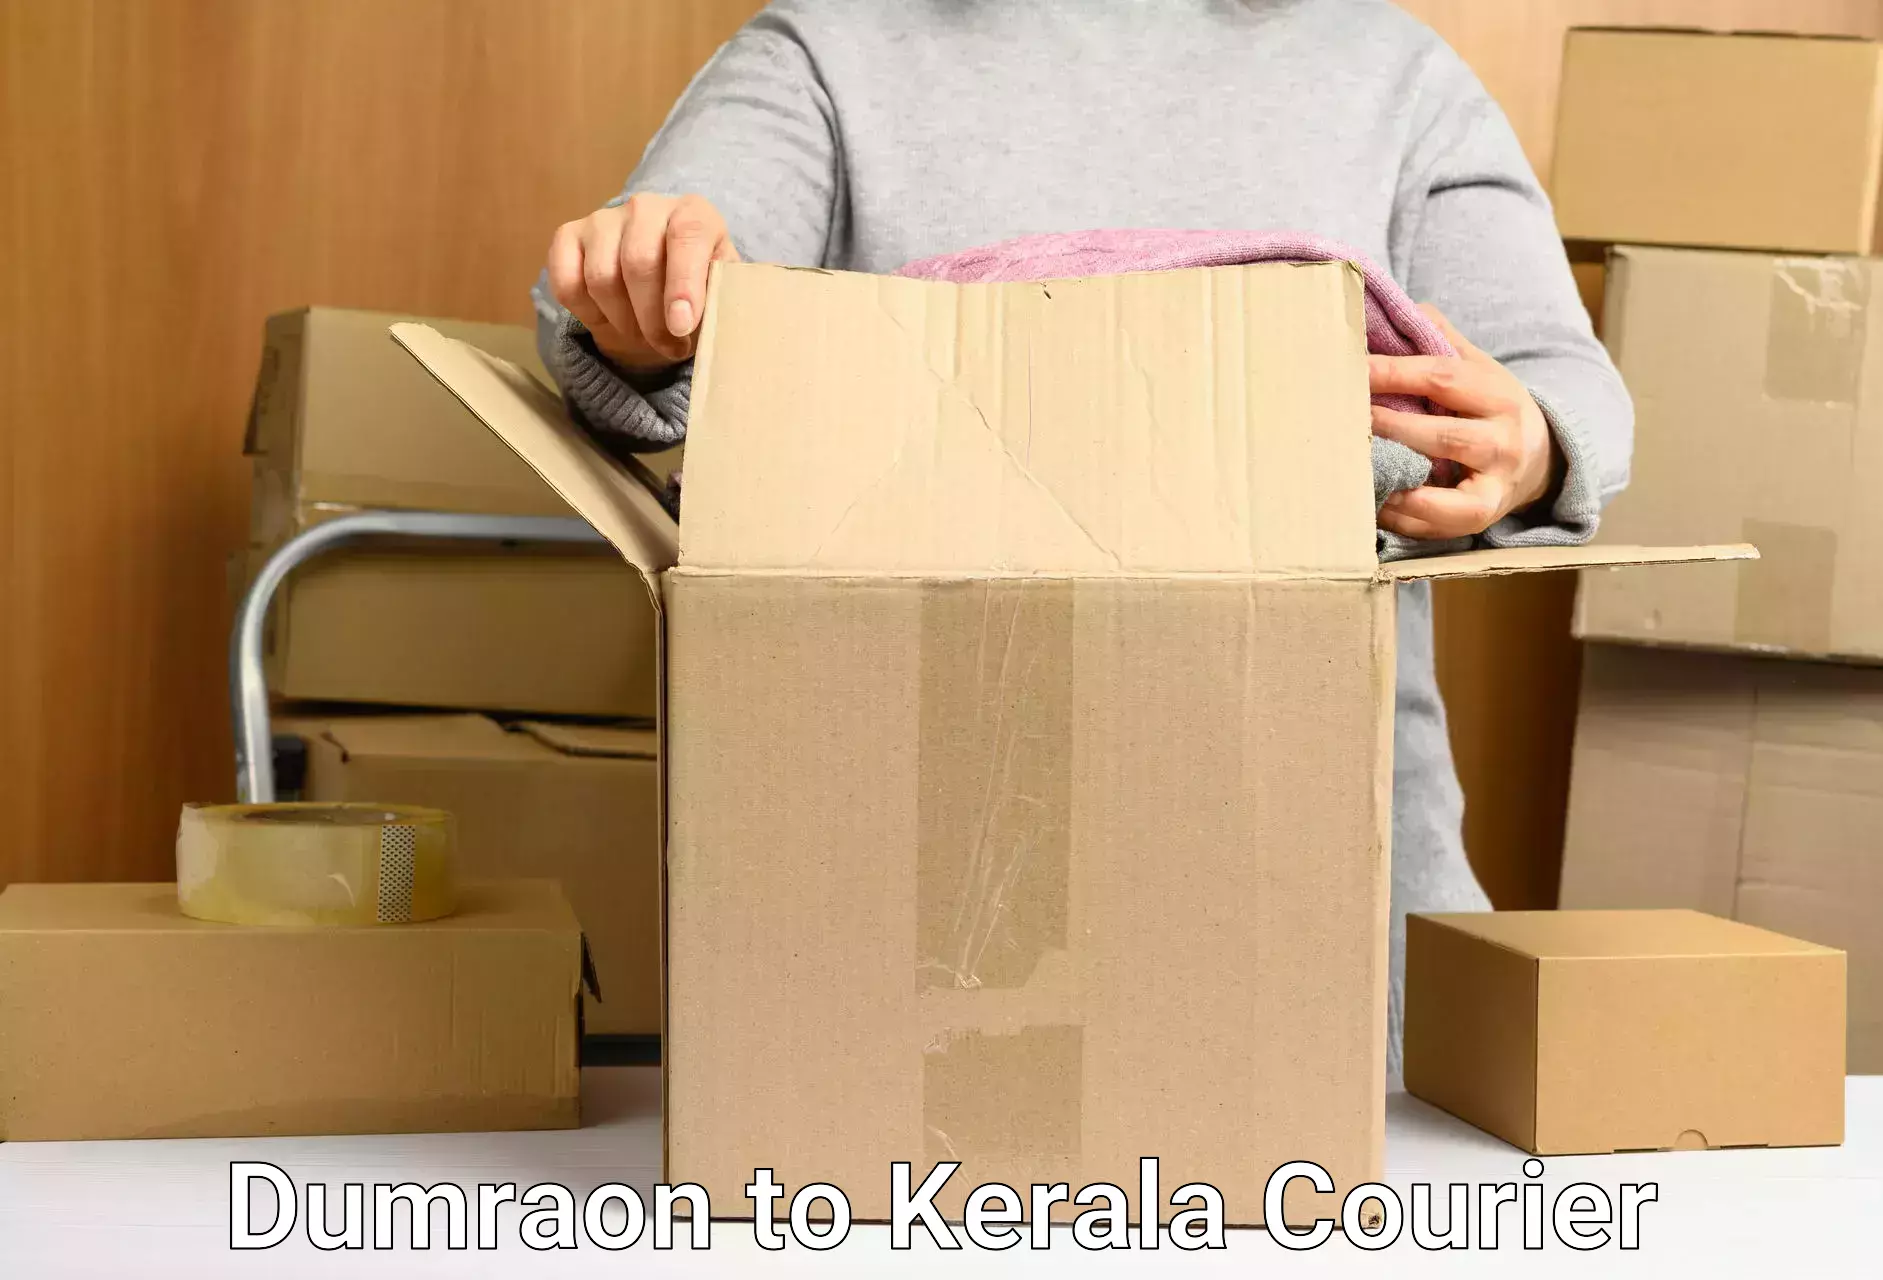 Express mail service in Dumraon to Kozhikode